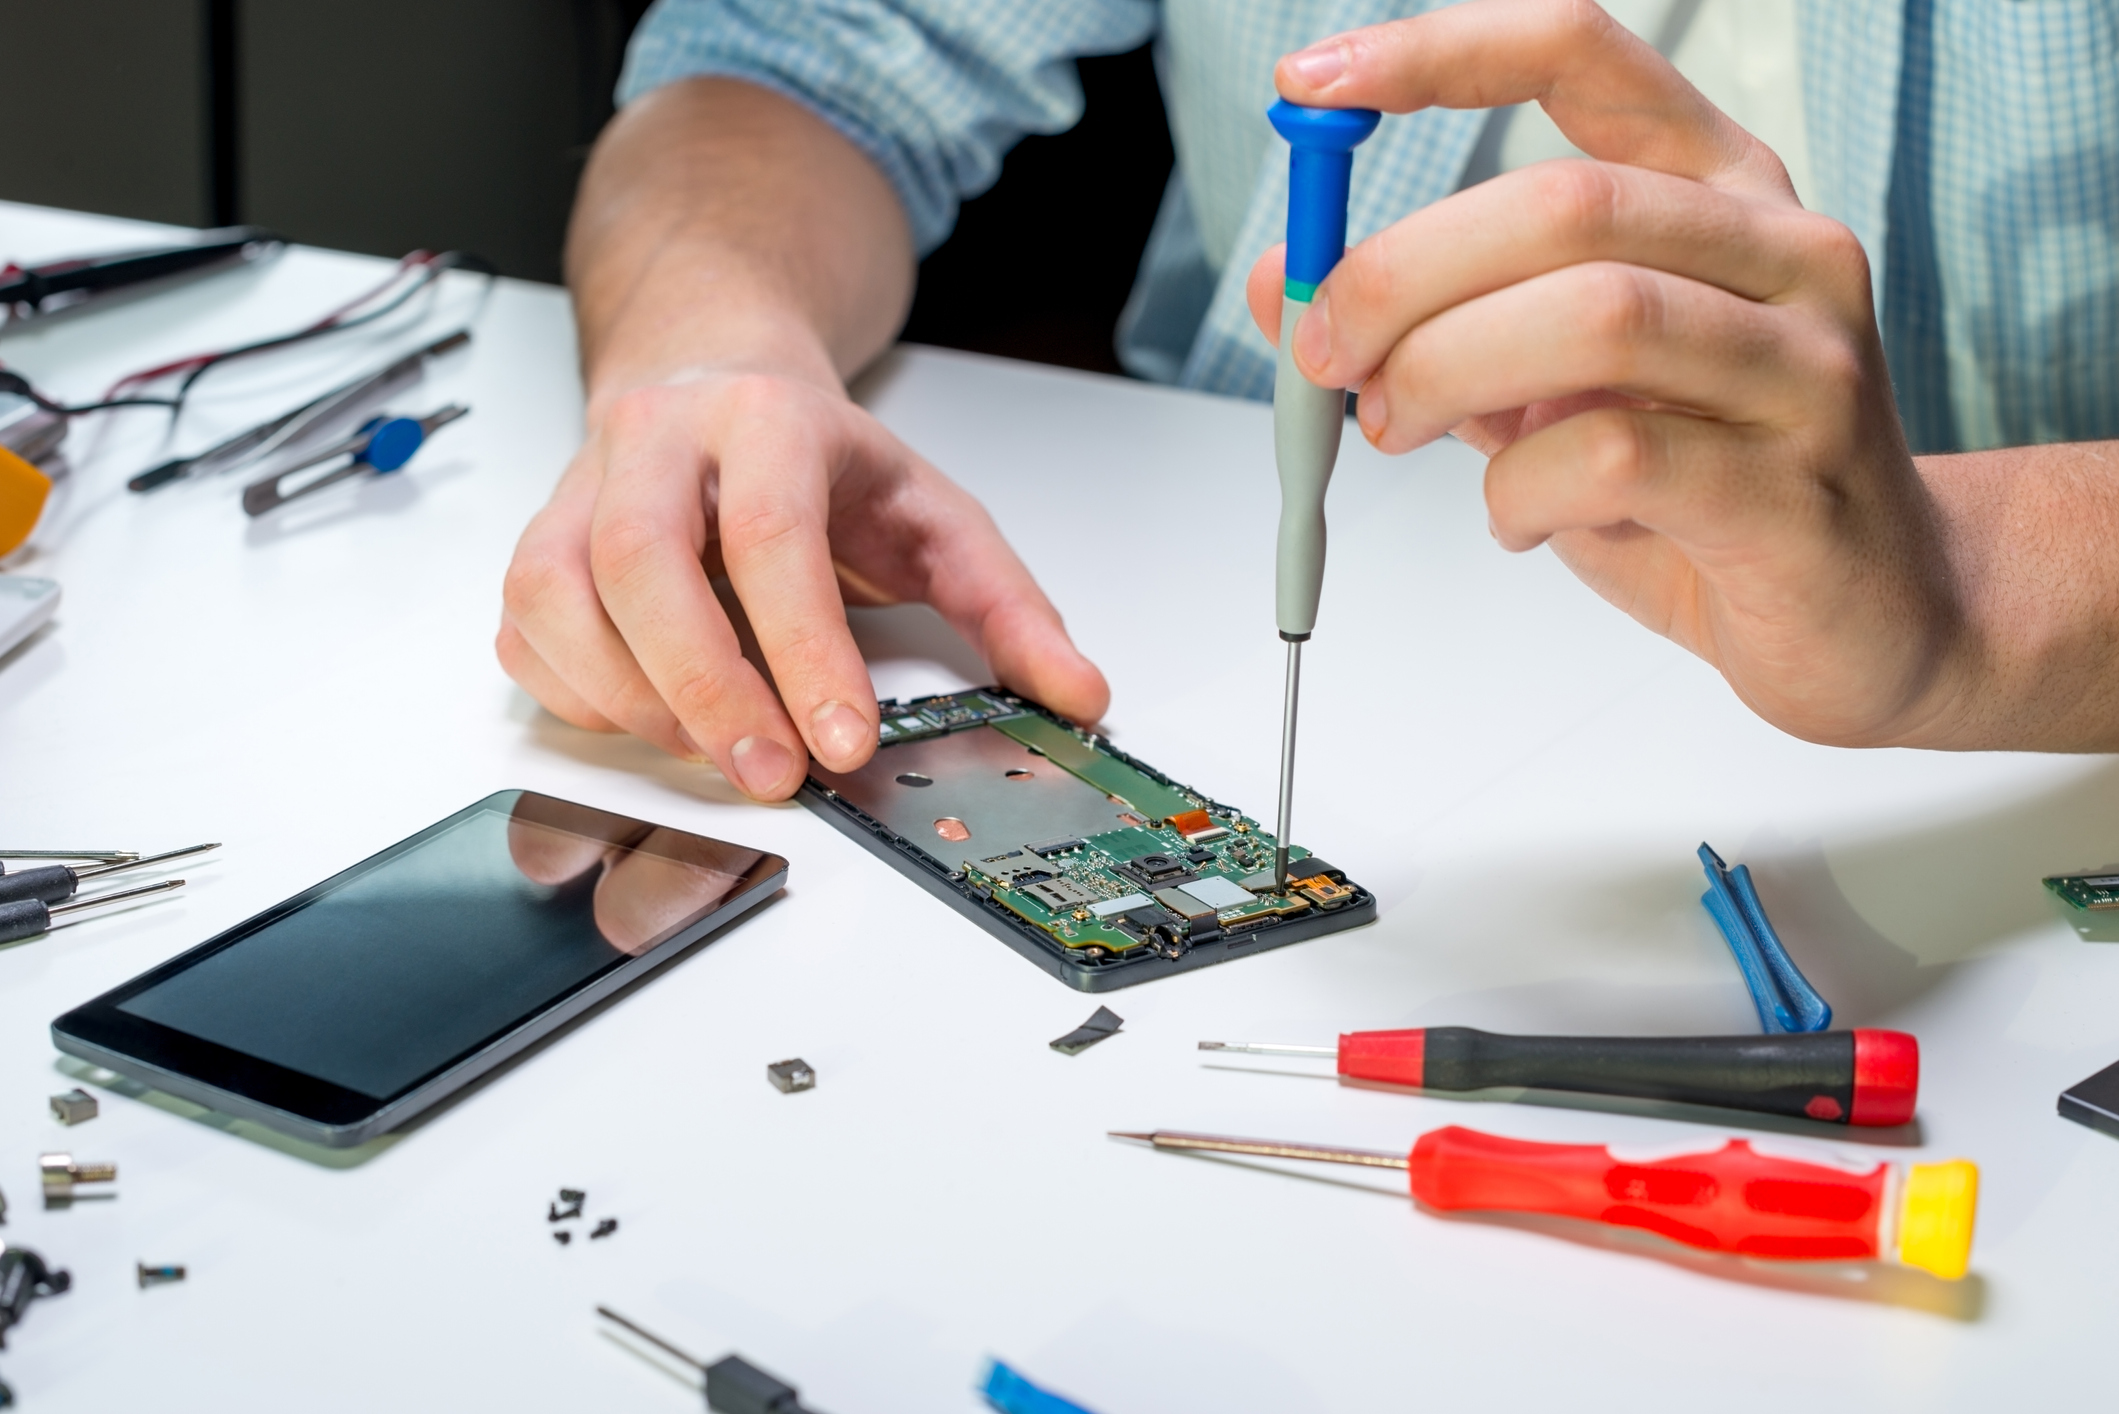 Say Goodbye to Cracked Screens with Expert iPhone Repair in Dallas